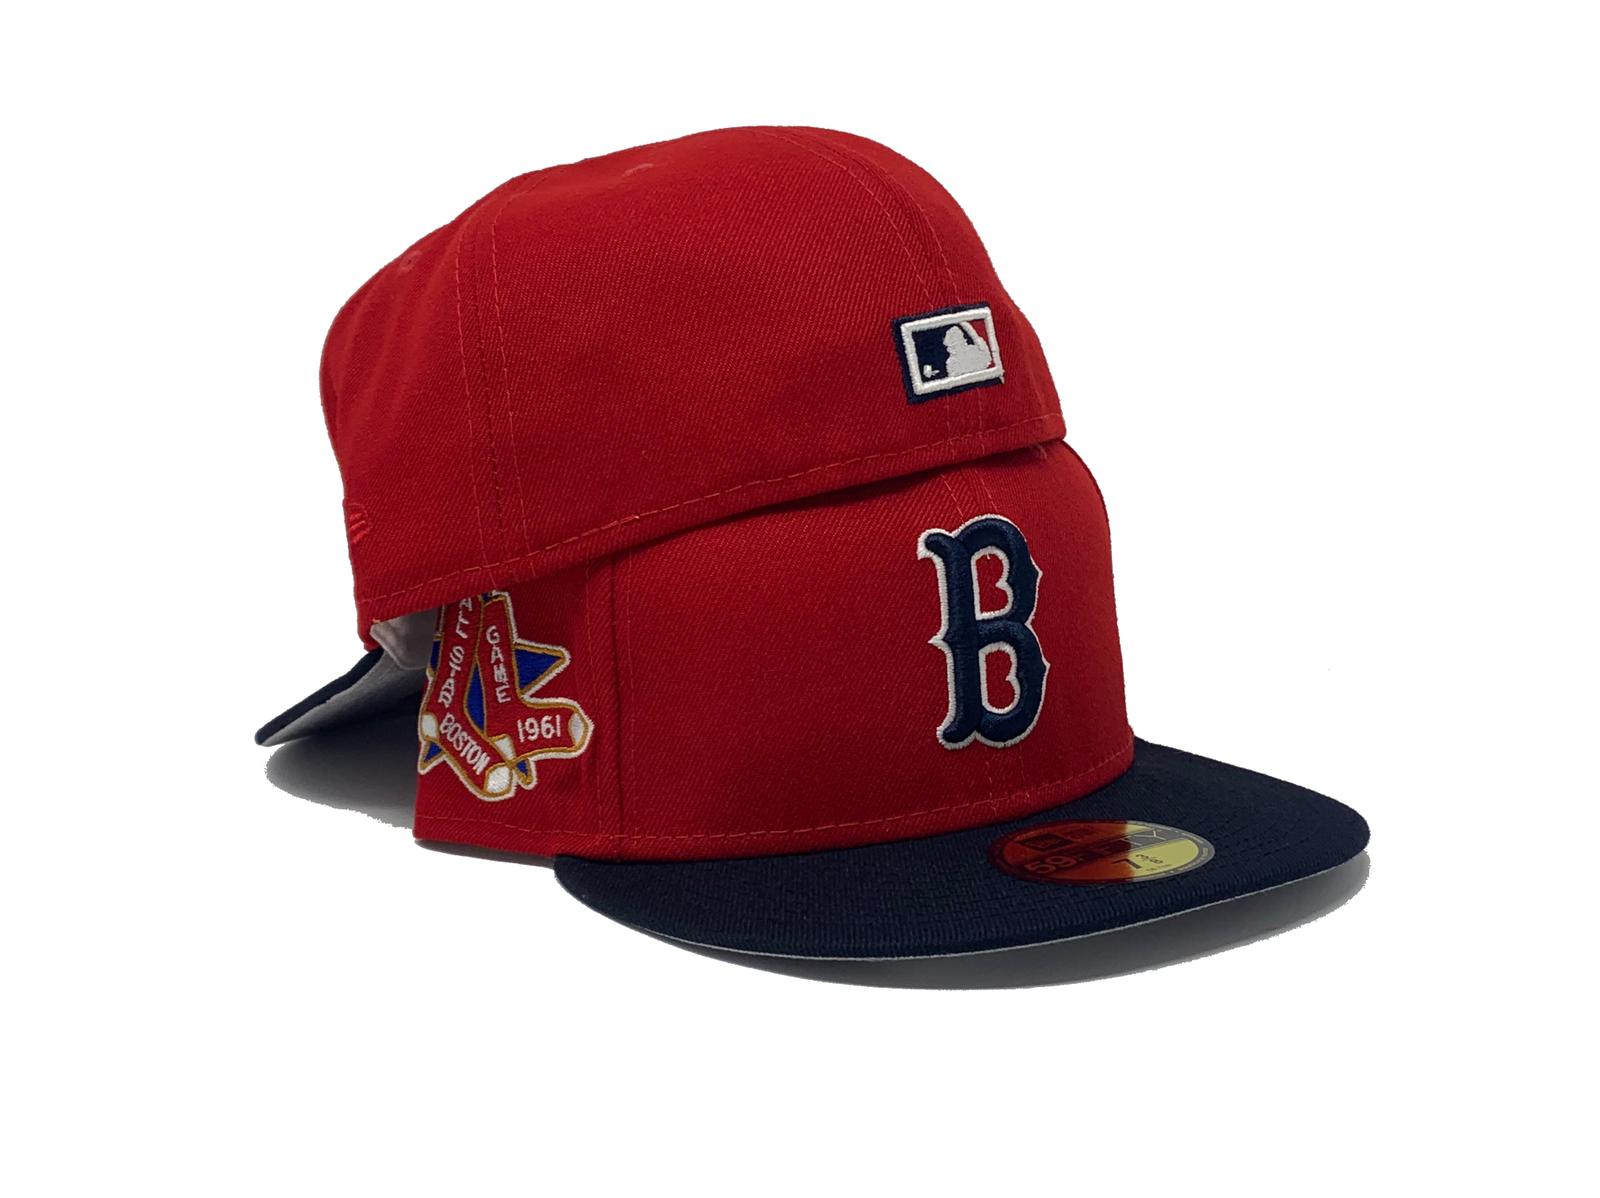 Official Boston Red Sox All Star Game Hats, MLB All Star Game Collection,  Red Sox All Star Game Jerseys, Gear